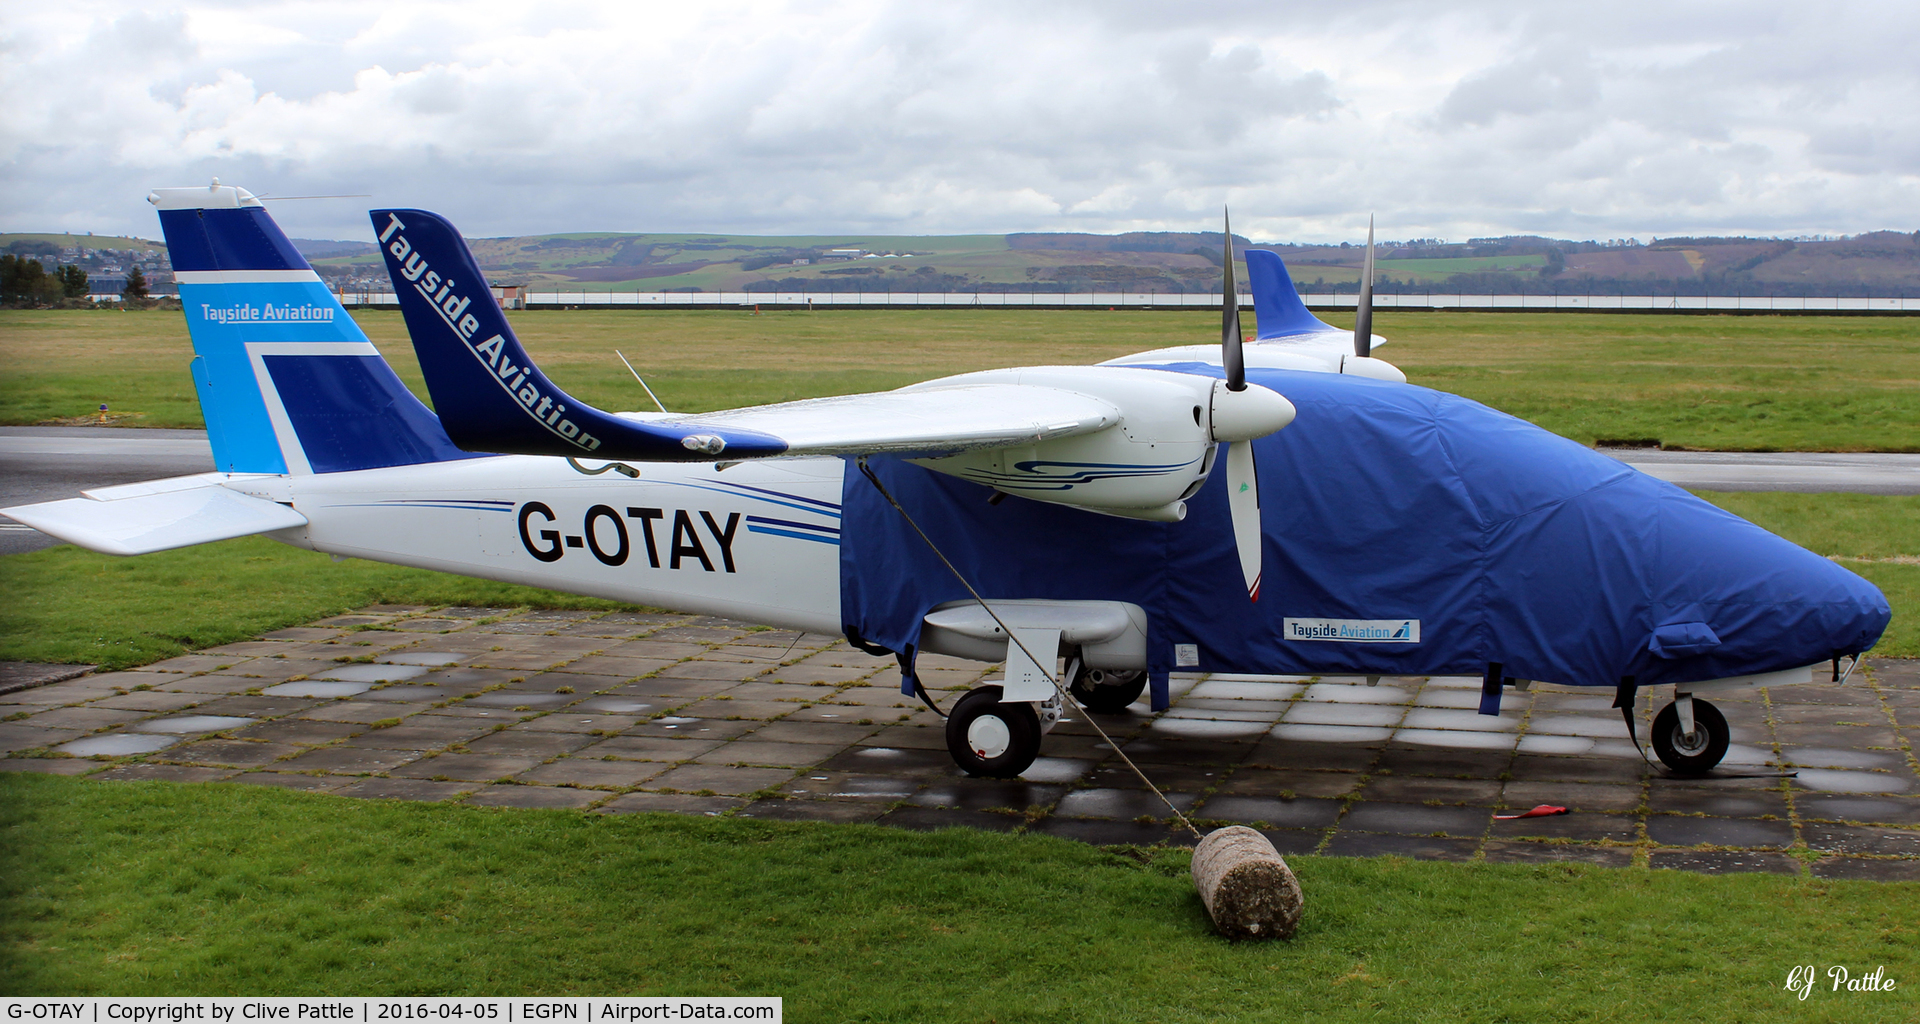 G-OTAY, 2010 Tecnam P-2006T C/N 049, Parked up at Dundee Riverside airport EGPN with Tayside Aviation.